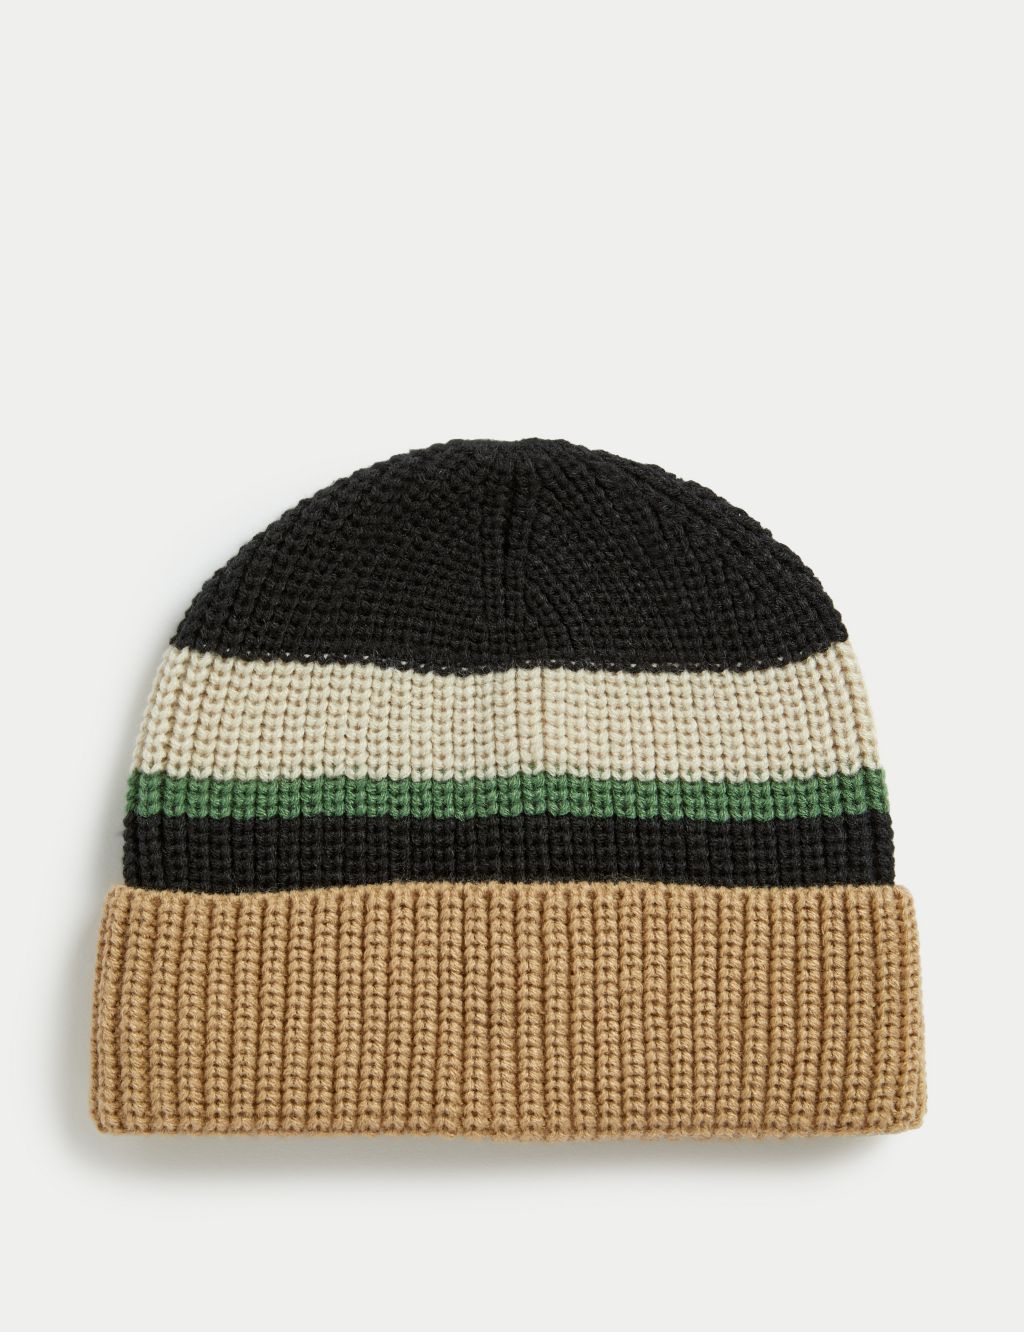 Striped Knitted Beanie Hat image 1